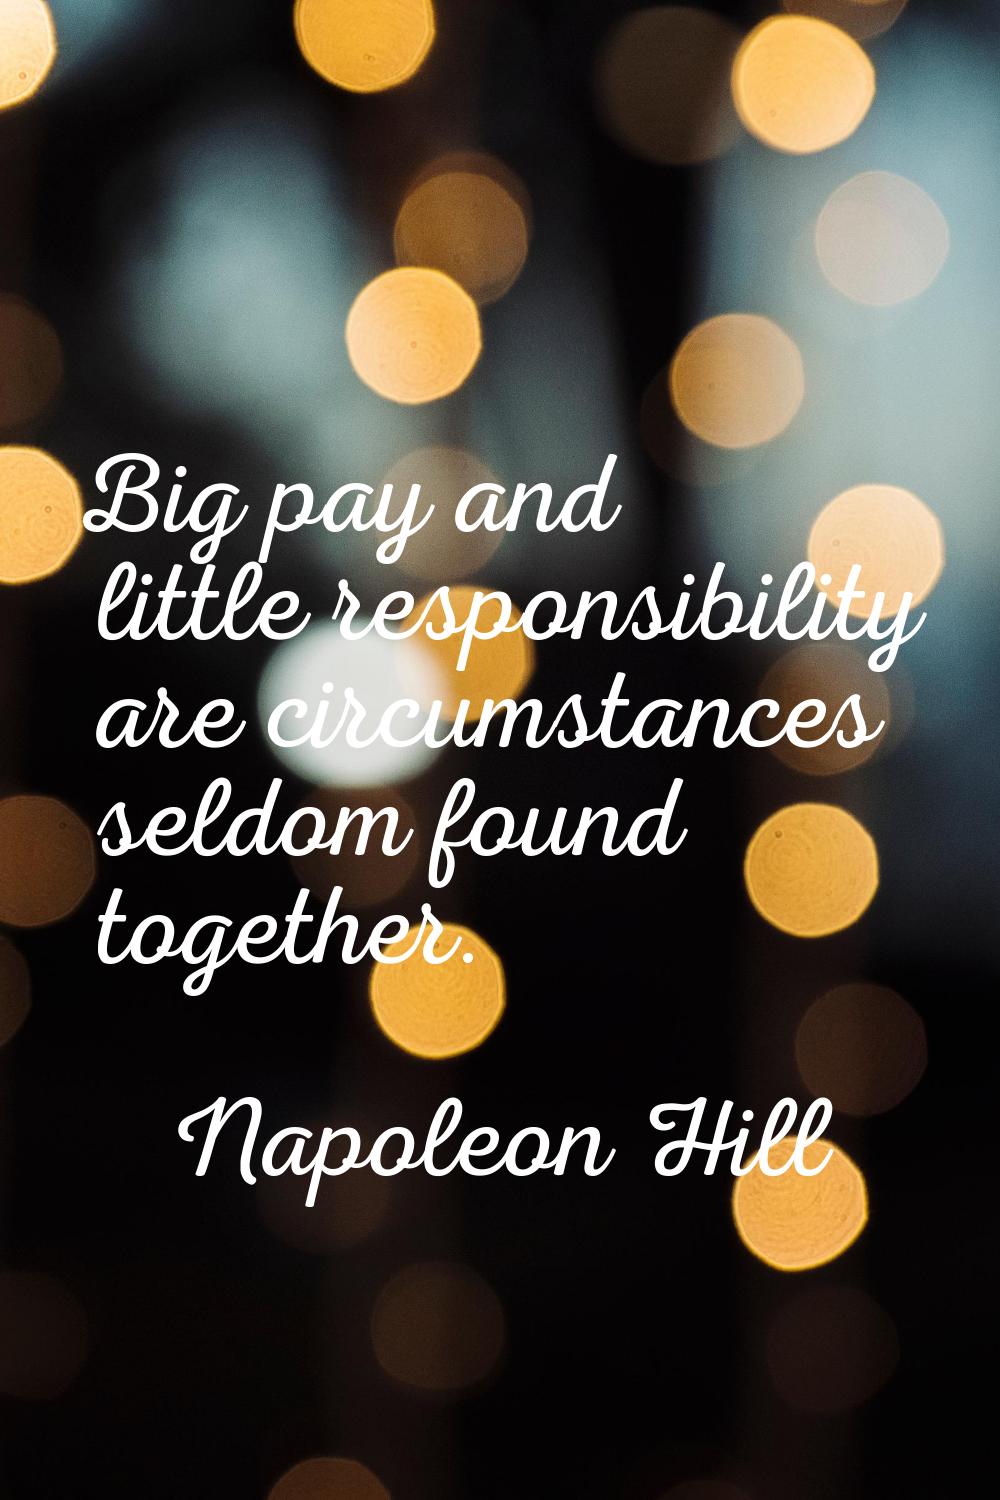 Big pay and little responsibility are circumstances seldom found together.